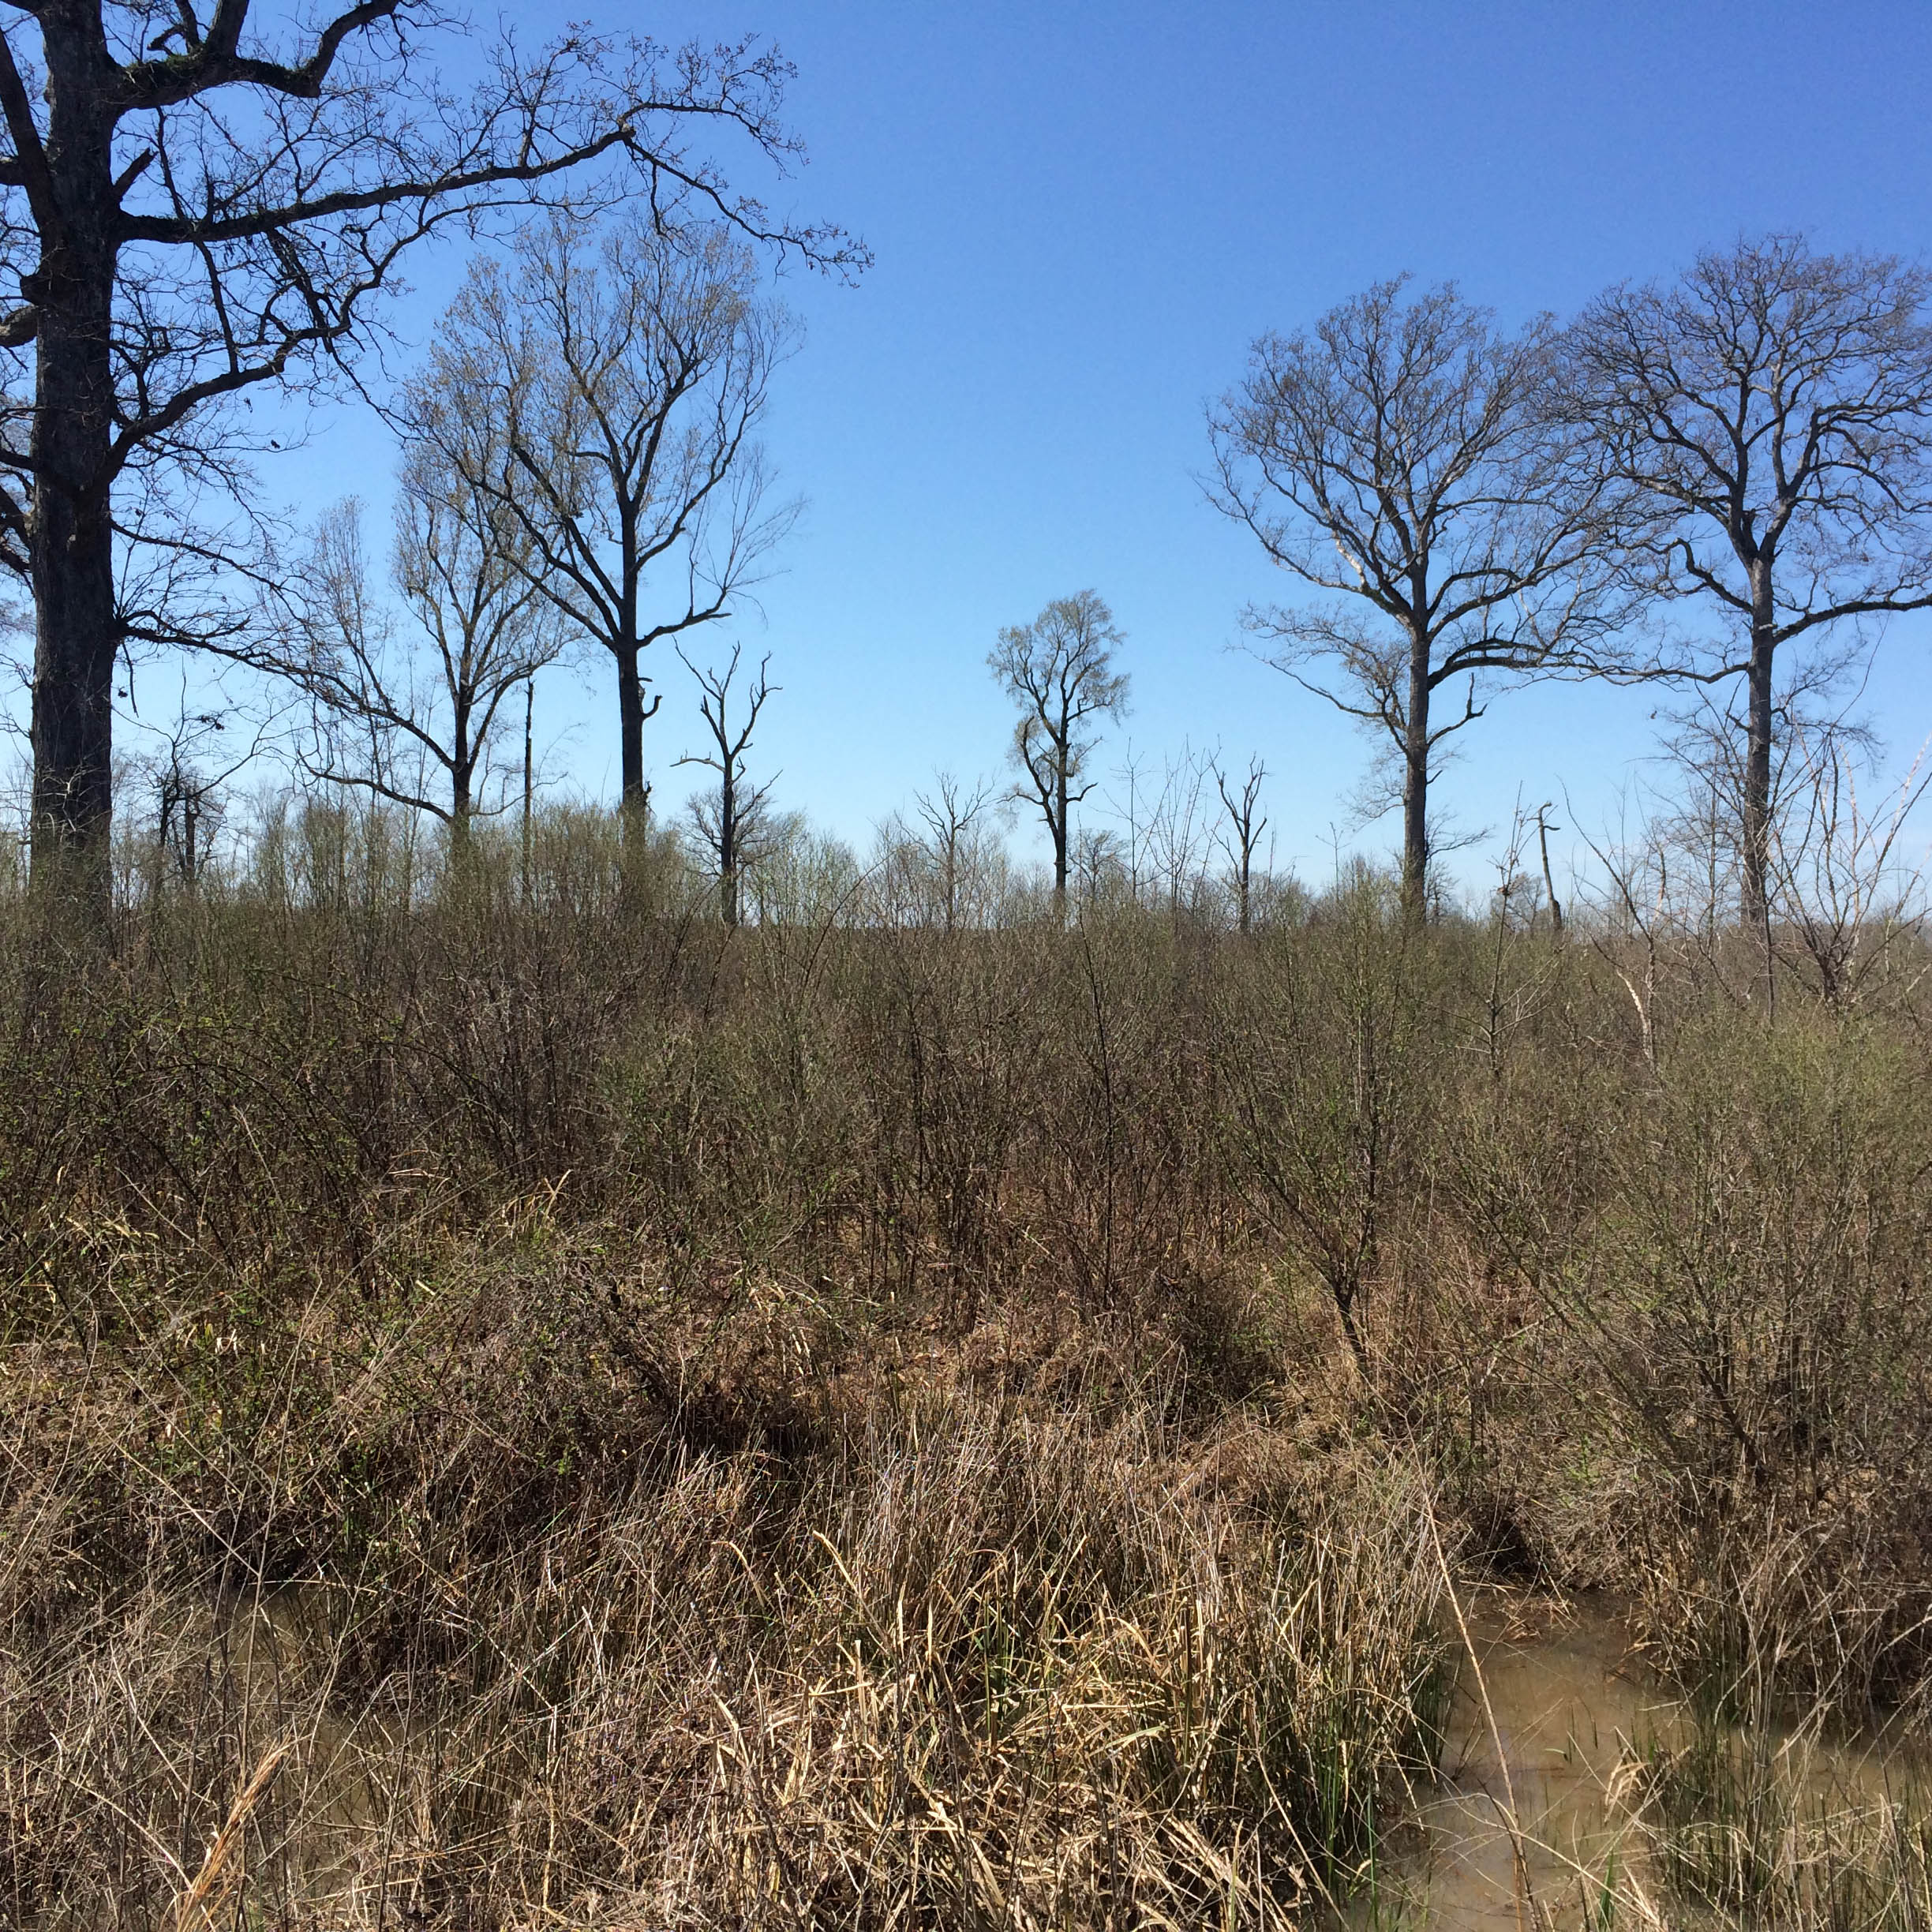 Image of the Long Lonesome mitigation bank located in Louisiana.